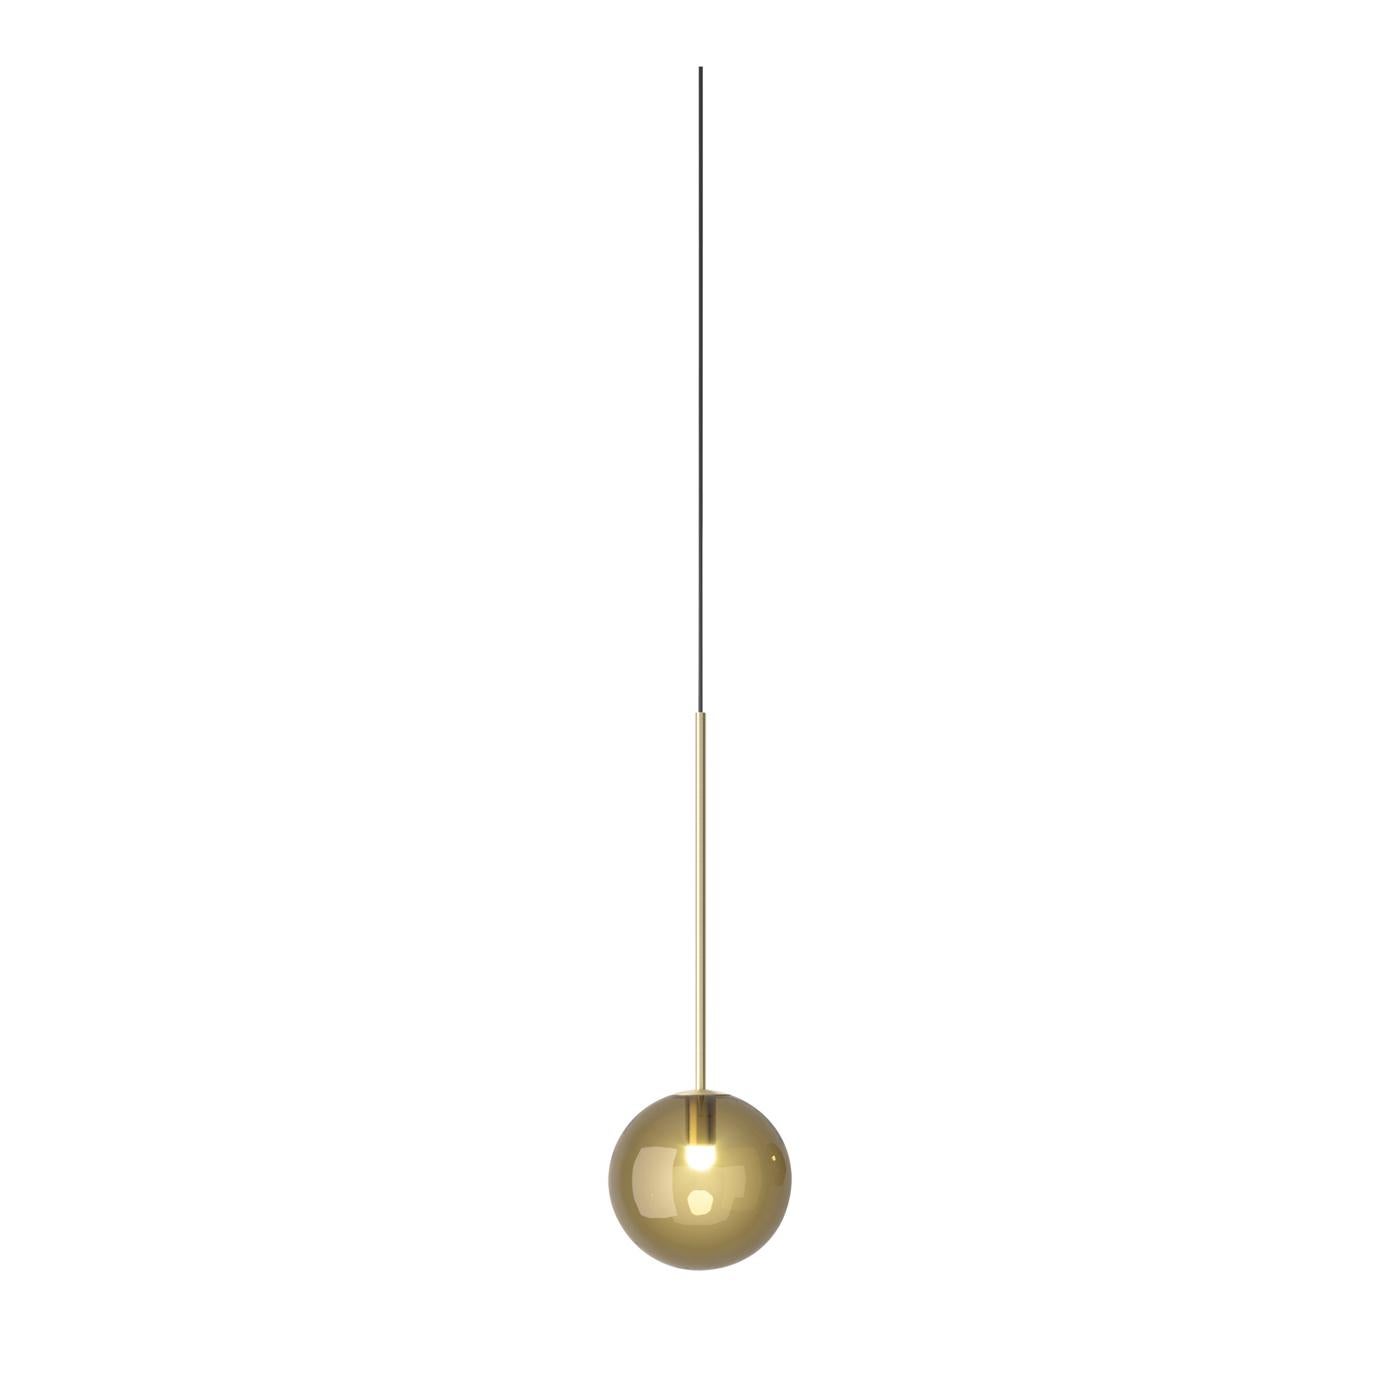 Timeless elegance, simple and meticulous lines obtained by refined and durable materials define this superb pendant lamp. It comprises a long stem (74 cm) crafted of brushed brass, mounted on a ceiling rose (Ø 18 cm) in the same material,